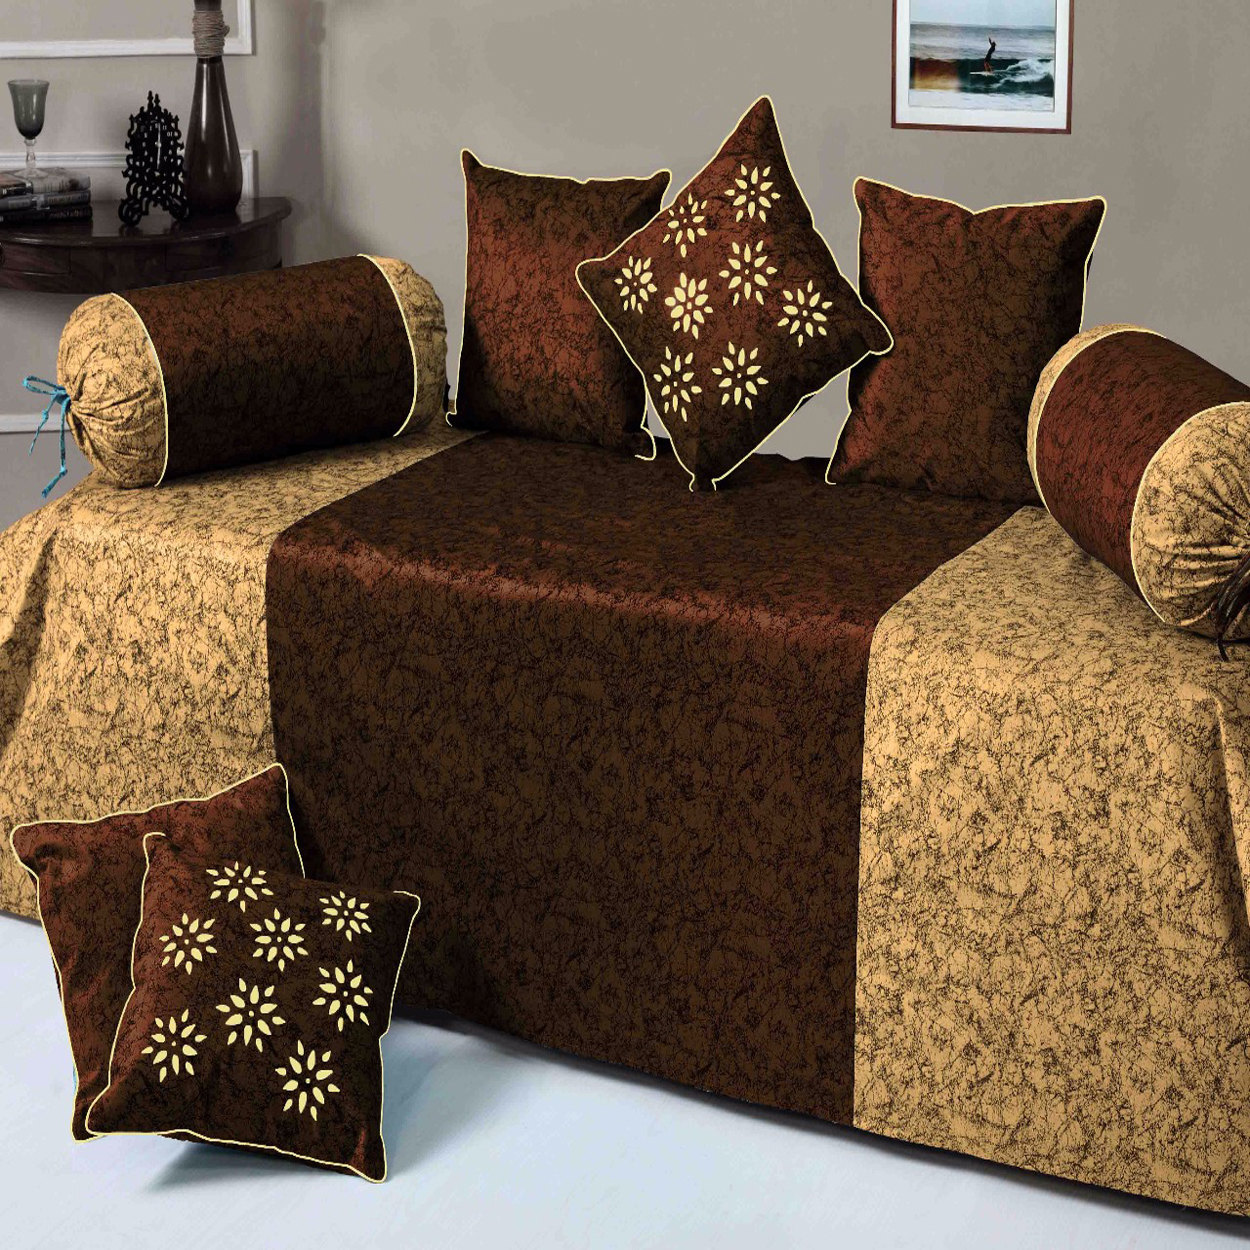 HandTex Home Coffee & Brown Color Designer Velvet Diwan set 1 Single Bedsheet With 5 Cushion Covers and 2 Blosters Covers